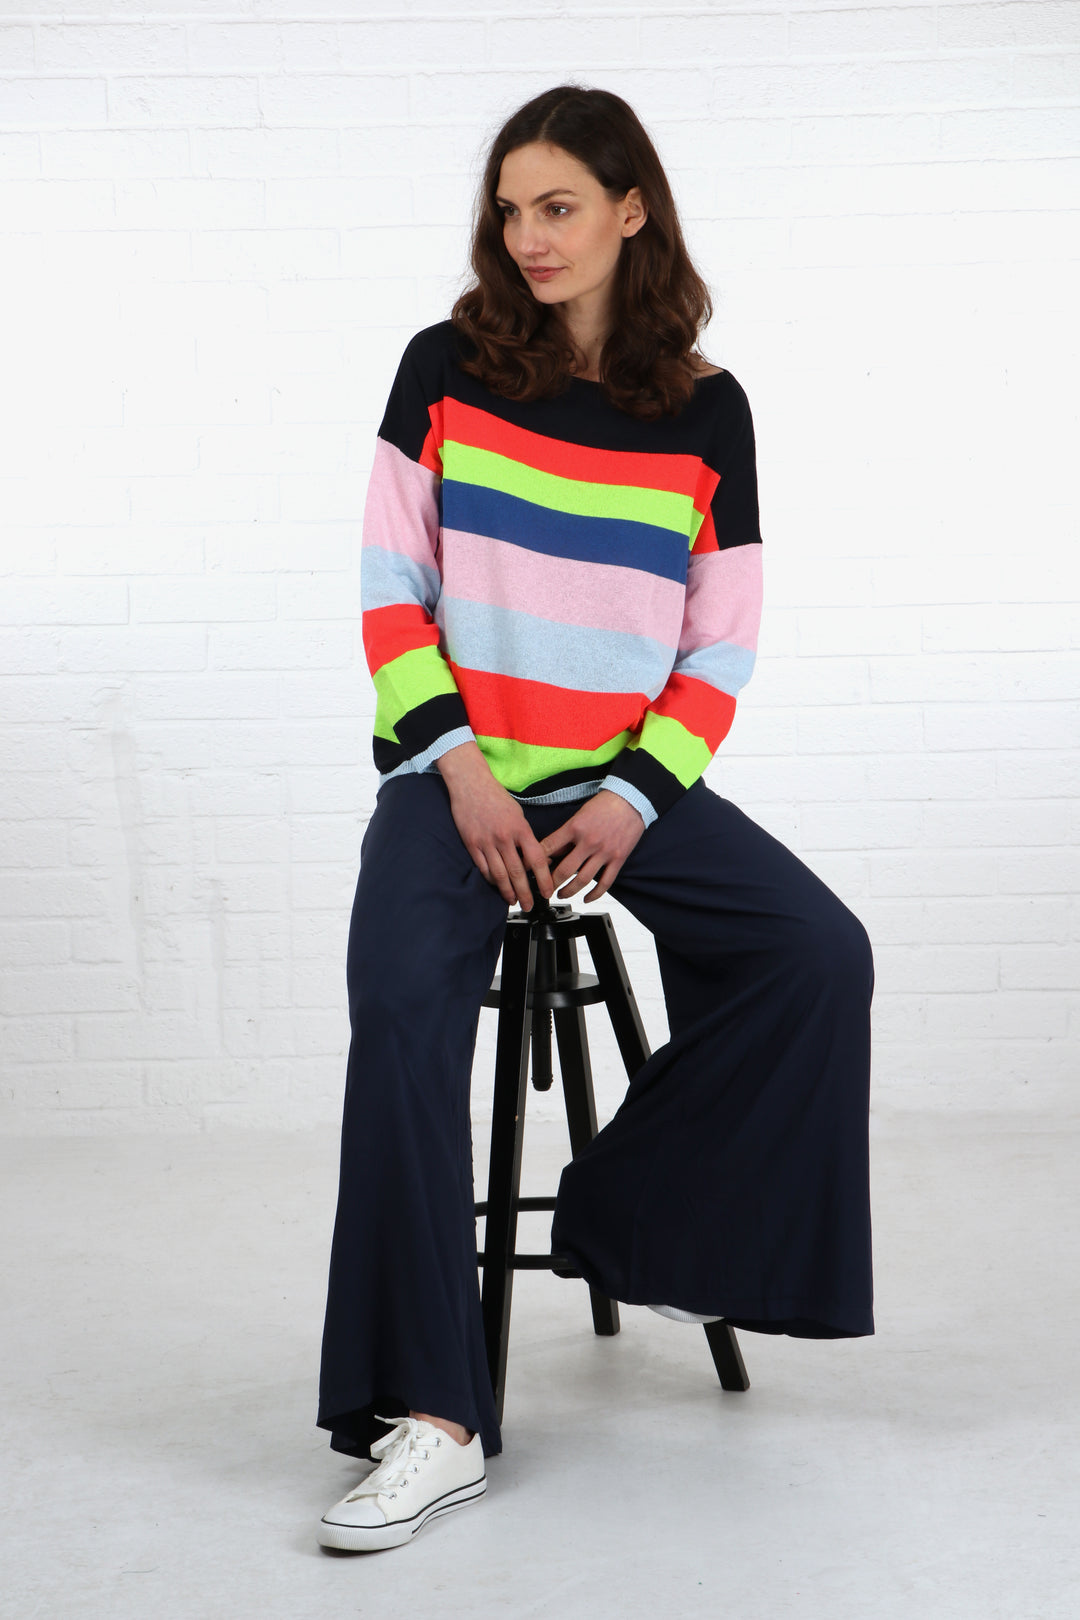 model seated on a stool wearing a pair of plain navy blue palazzo pants